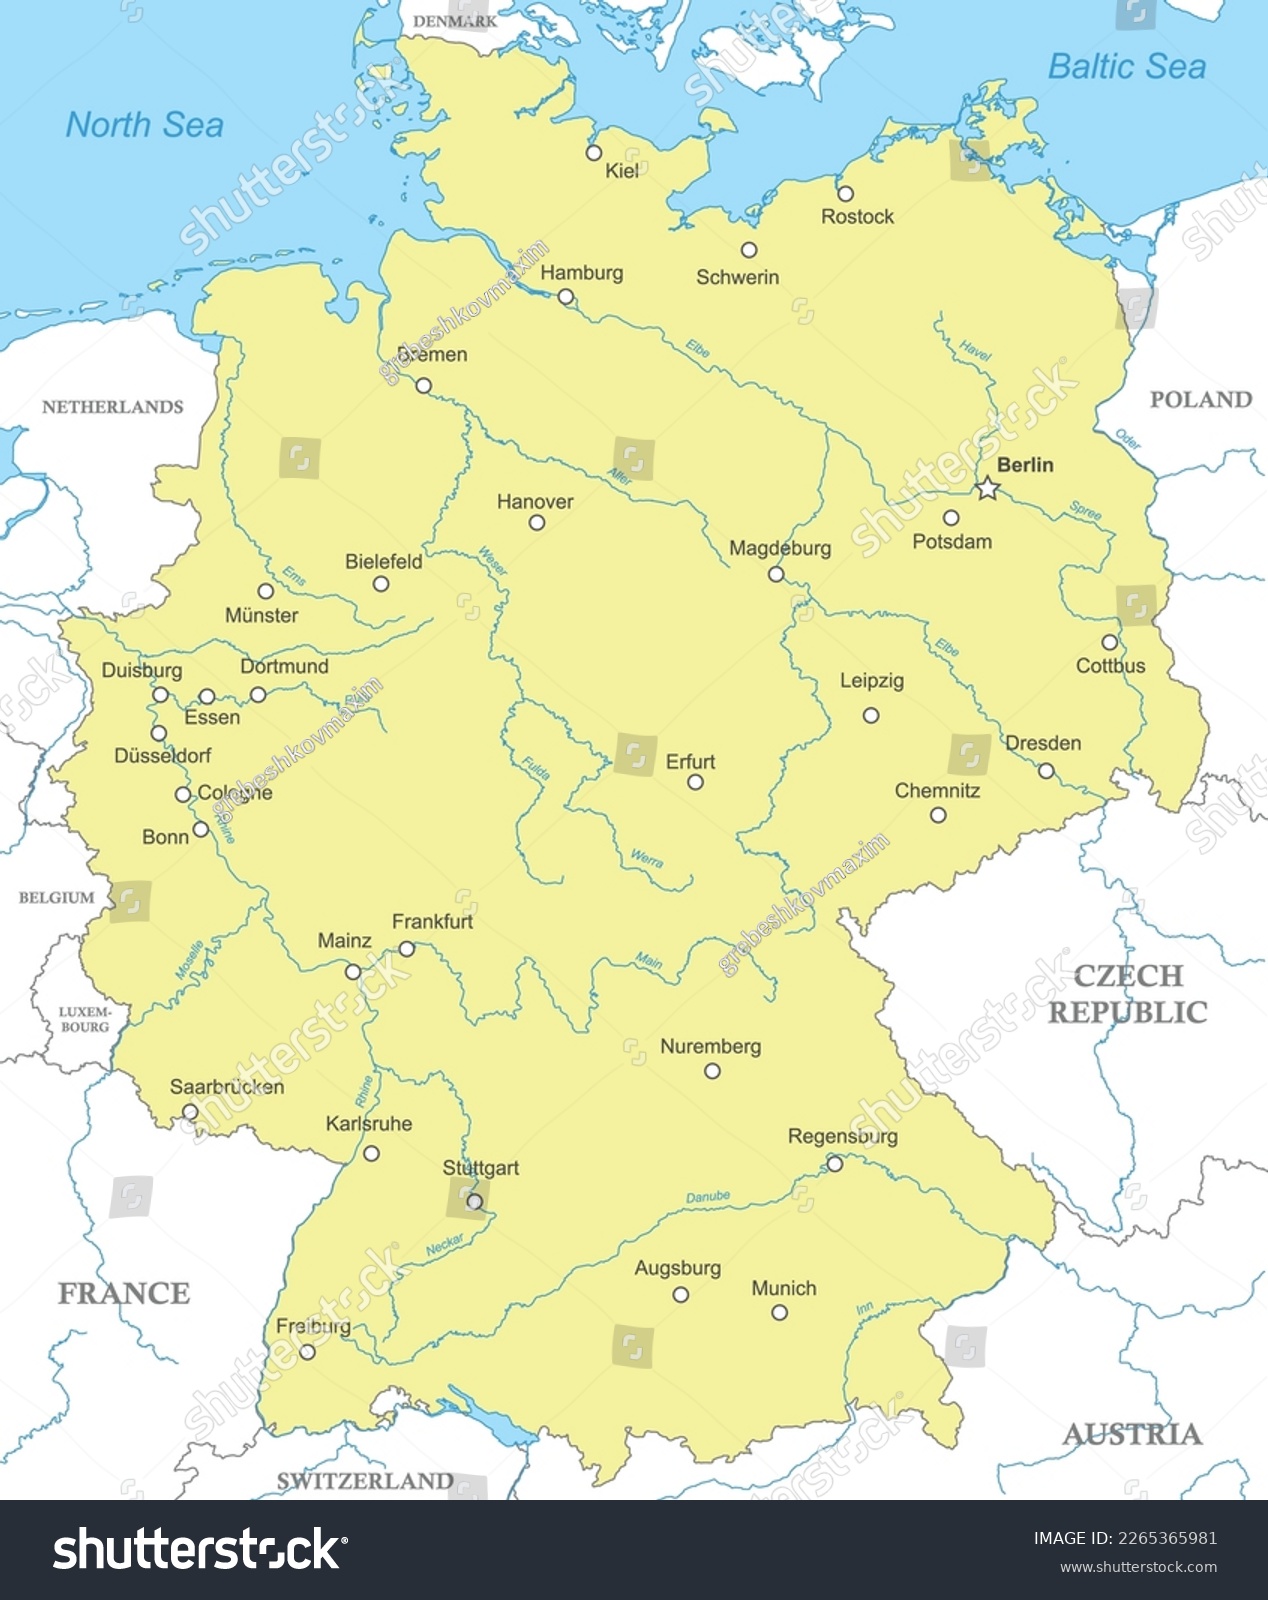 SVG of Political map of Germany with national borders, cities and rivers svg